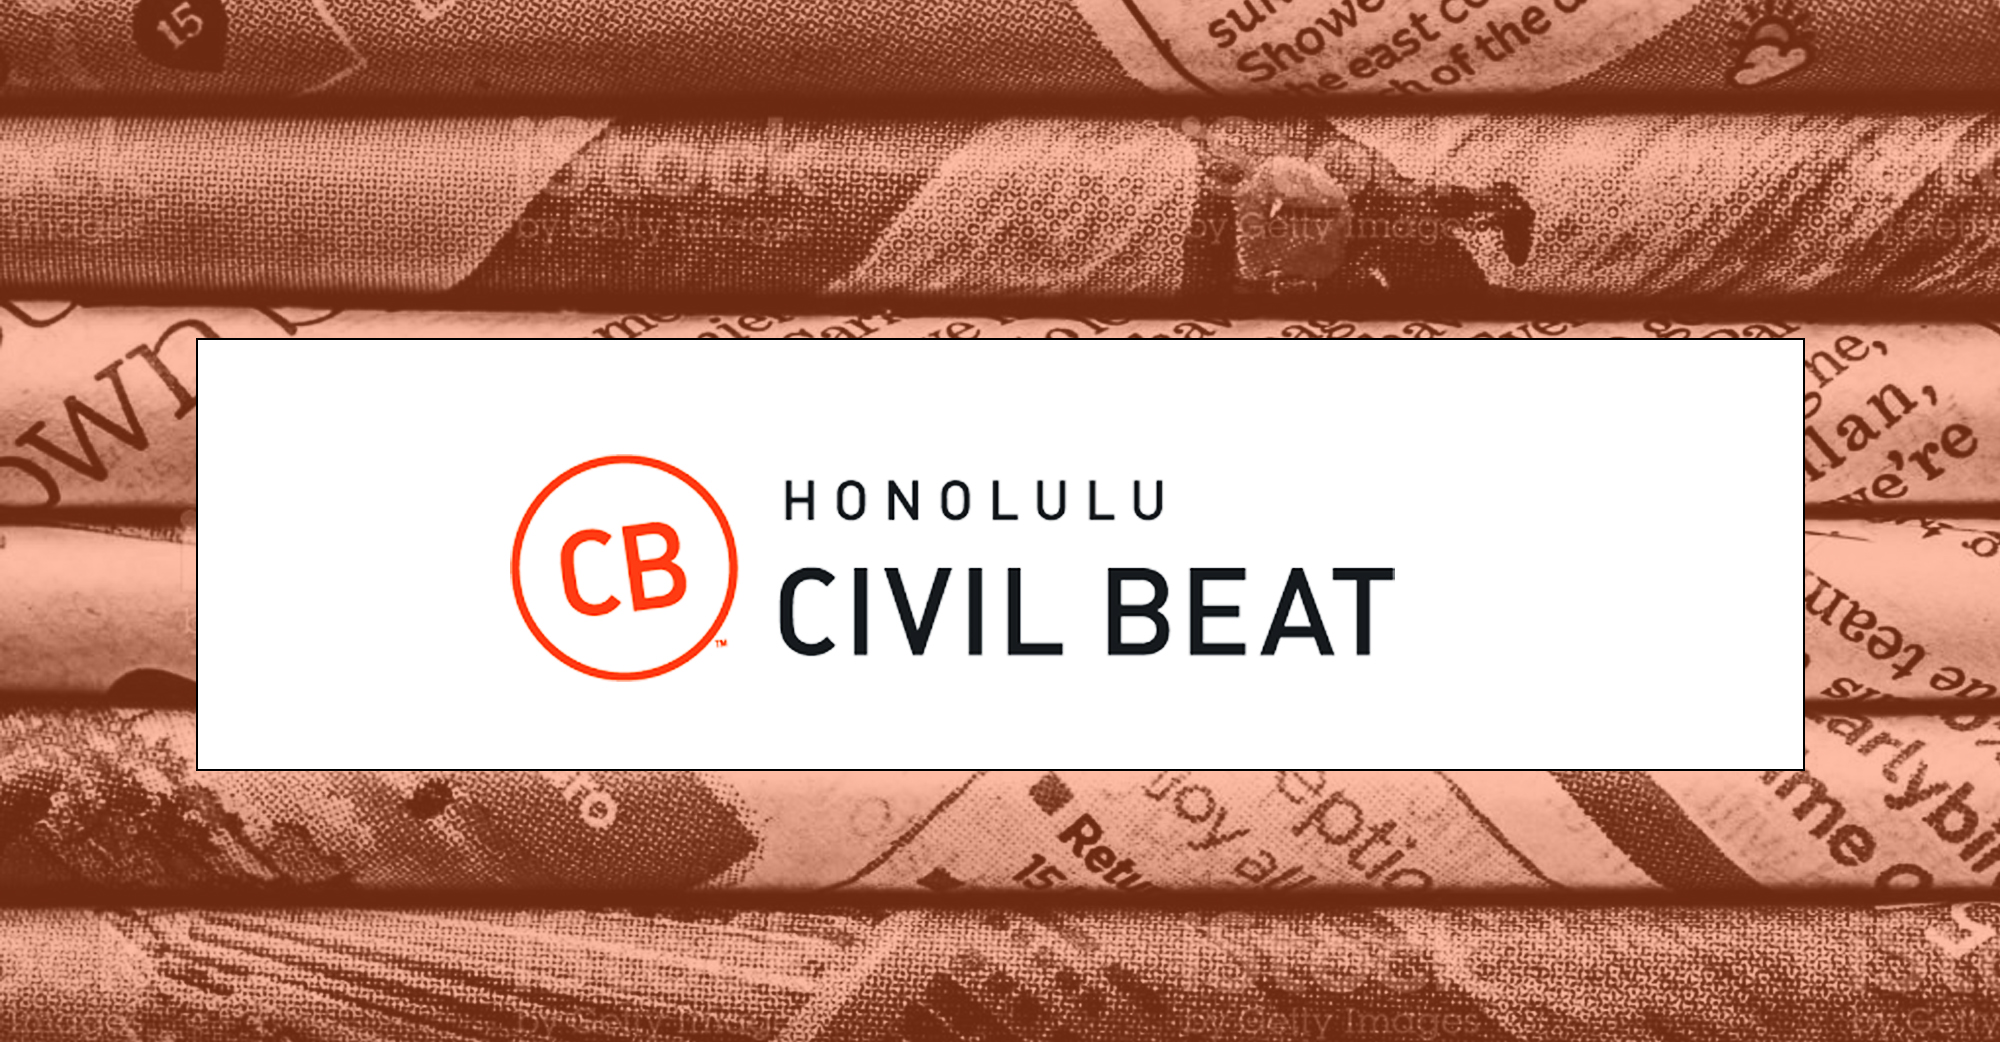 The Big Island Mayor’s Decision To Close Waipio Valley Road Rankles Residents – Civil Beat 3/9/22